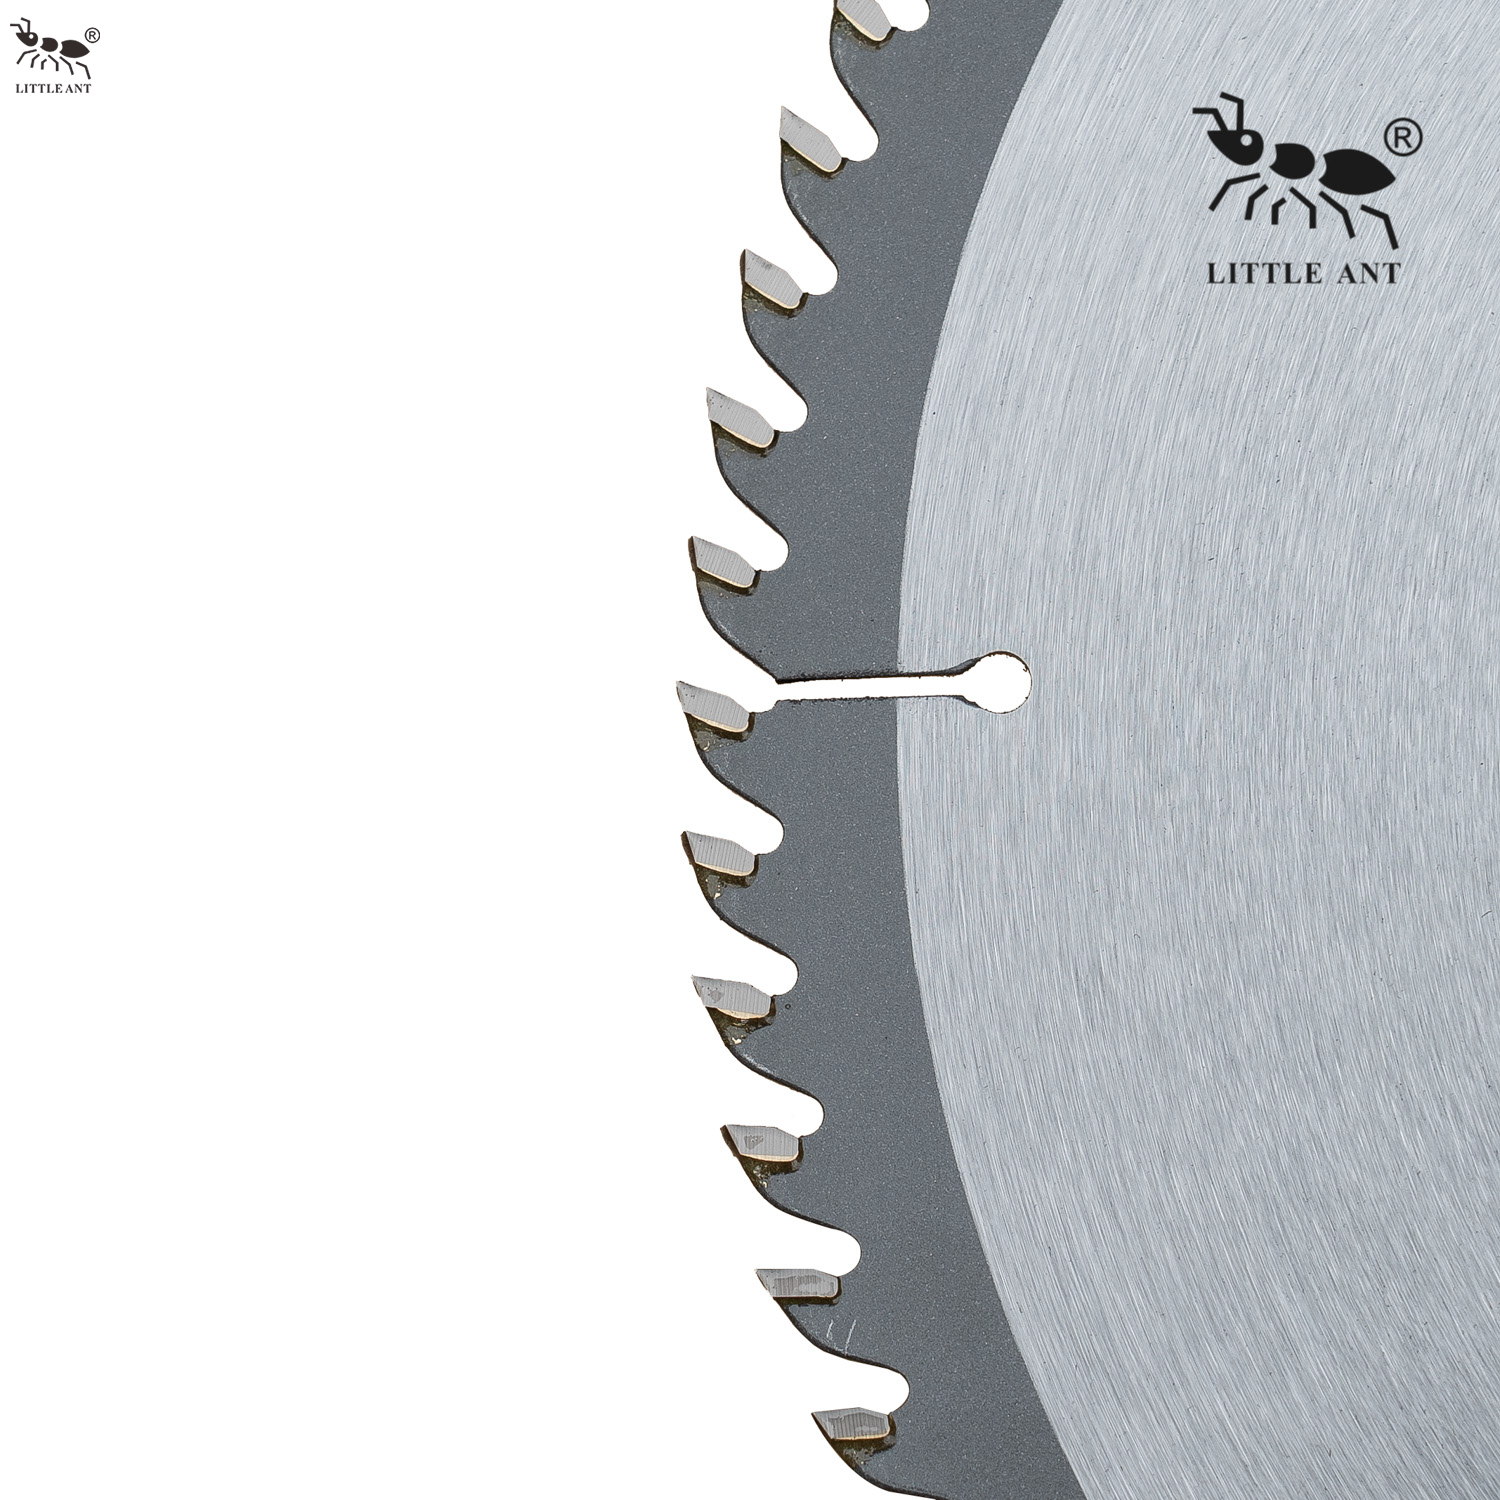 LITTLE ANT 65mn Steel Lithium Electric Saw Special Silent Industrial TCT Blade Tungsten Alloy Wood Sawing Disc 